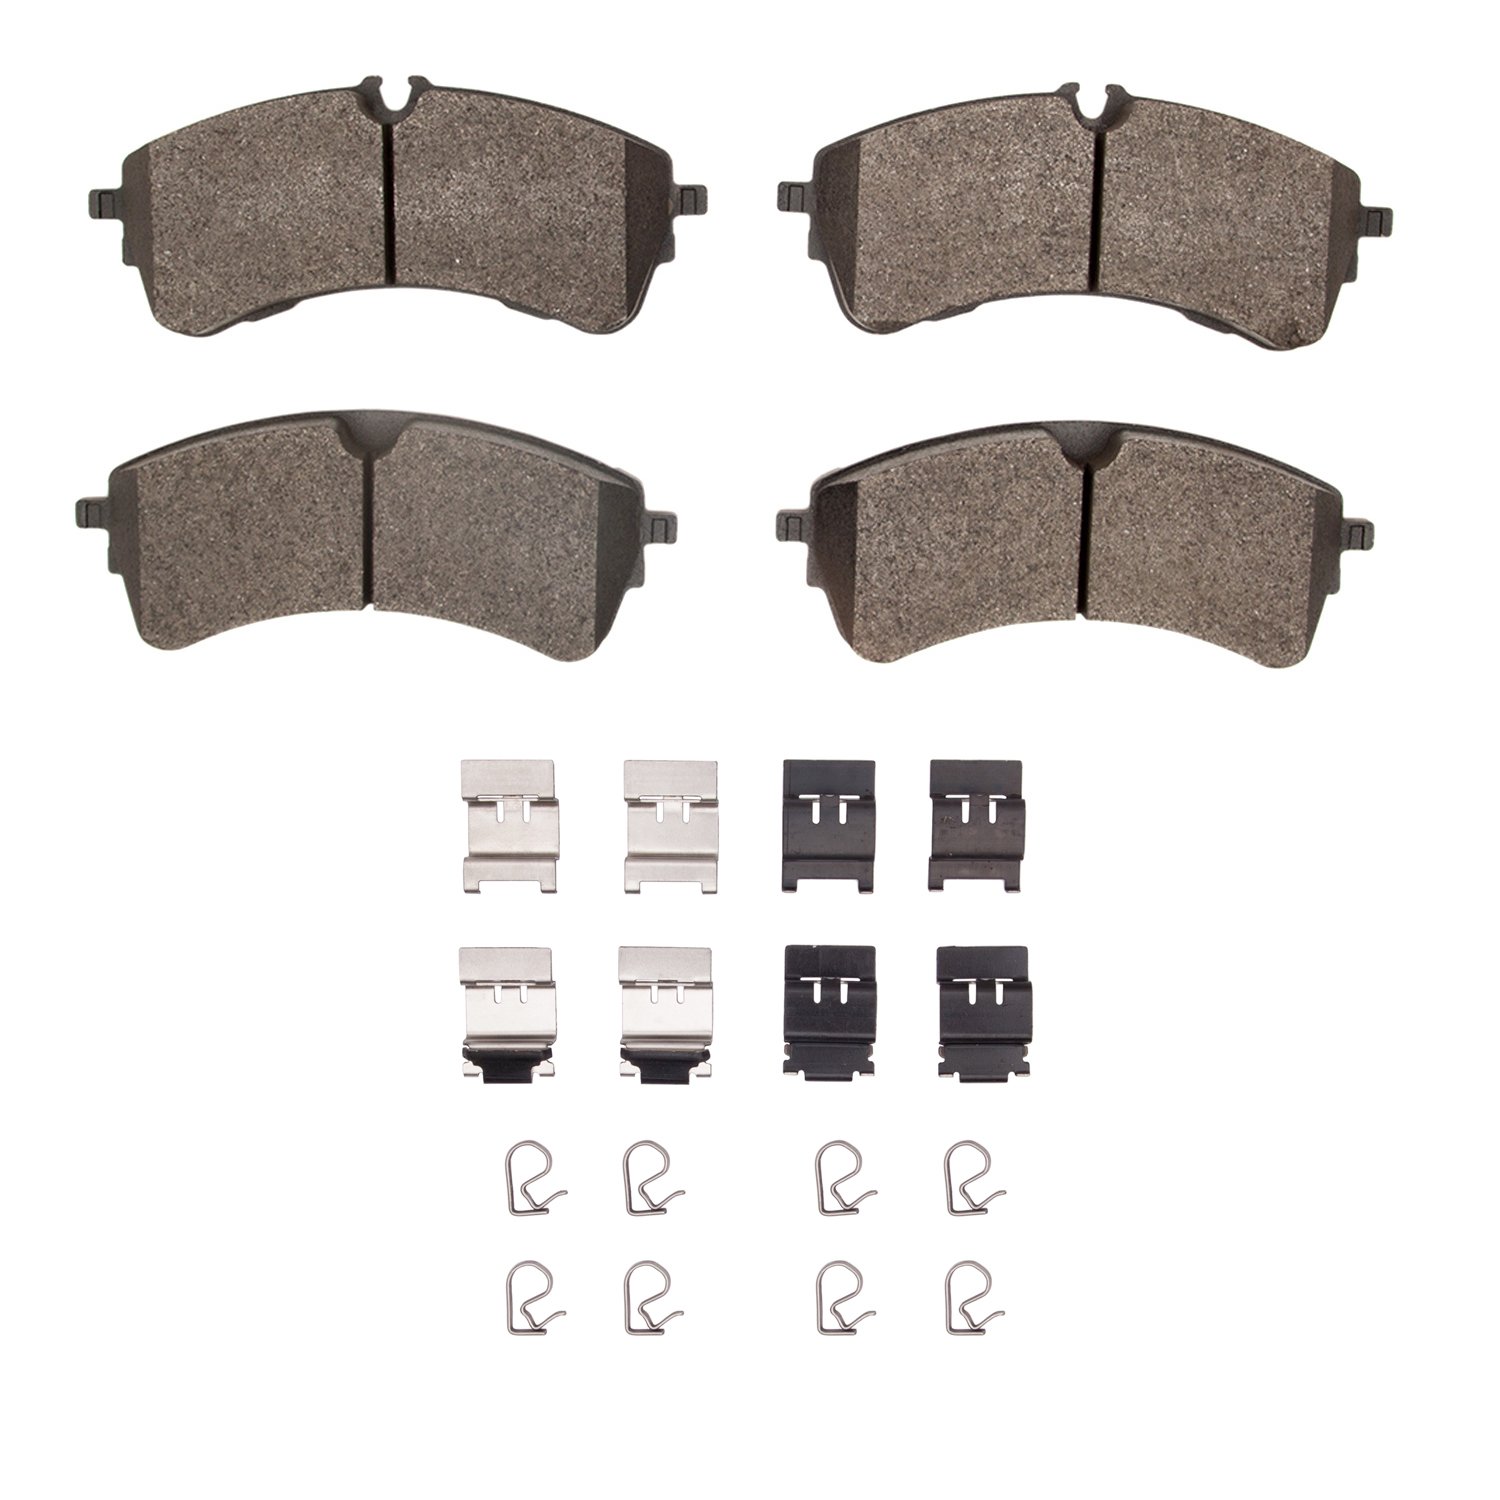 1214-2280-01 Heavy-Duty Brake Pads & Hardware Kit, Fits Select Ford/Lincoln/Mercury/Mazda, Position: Rear